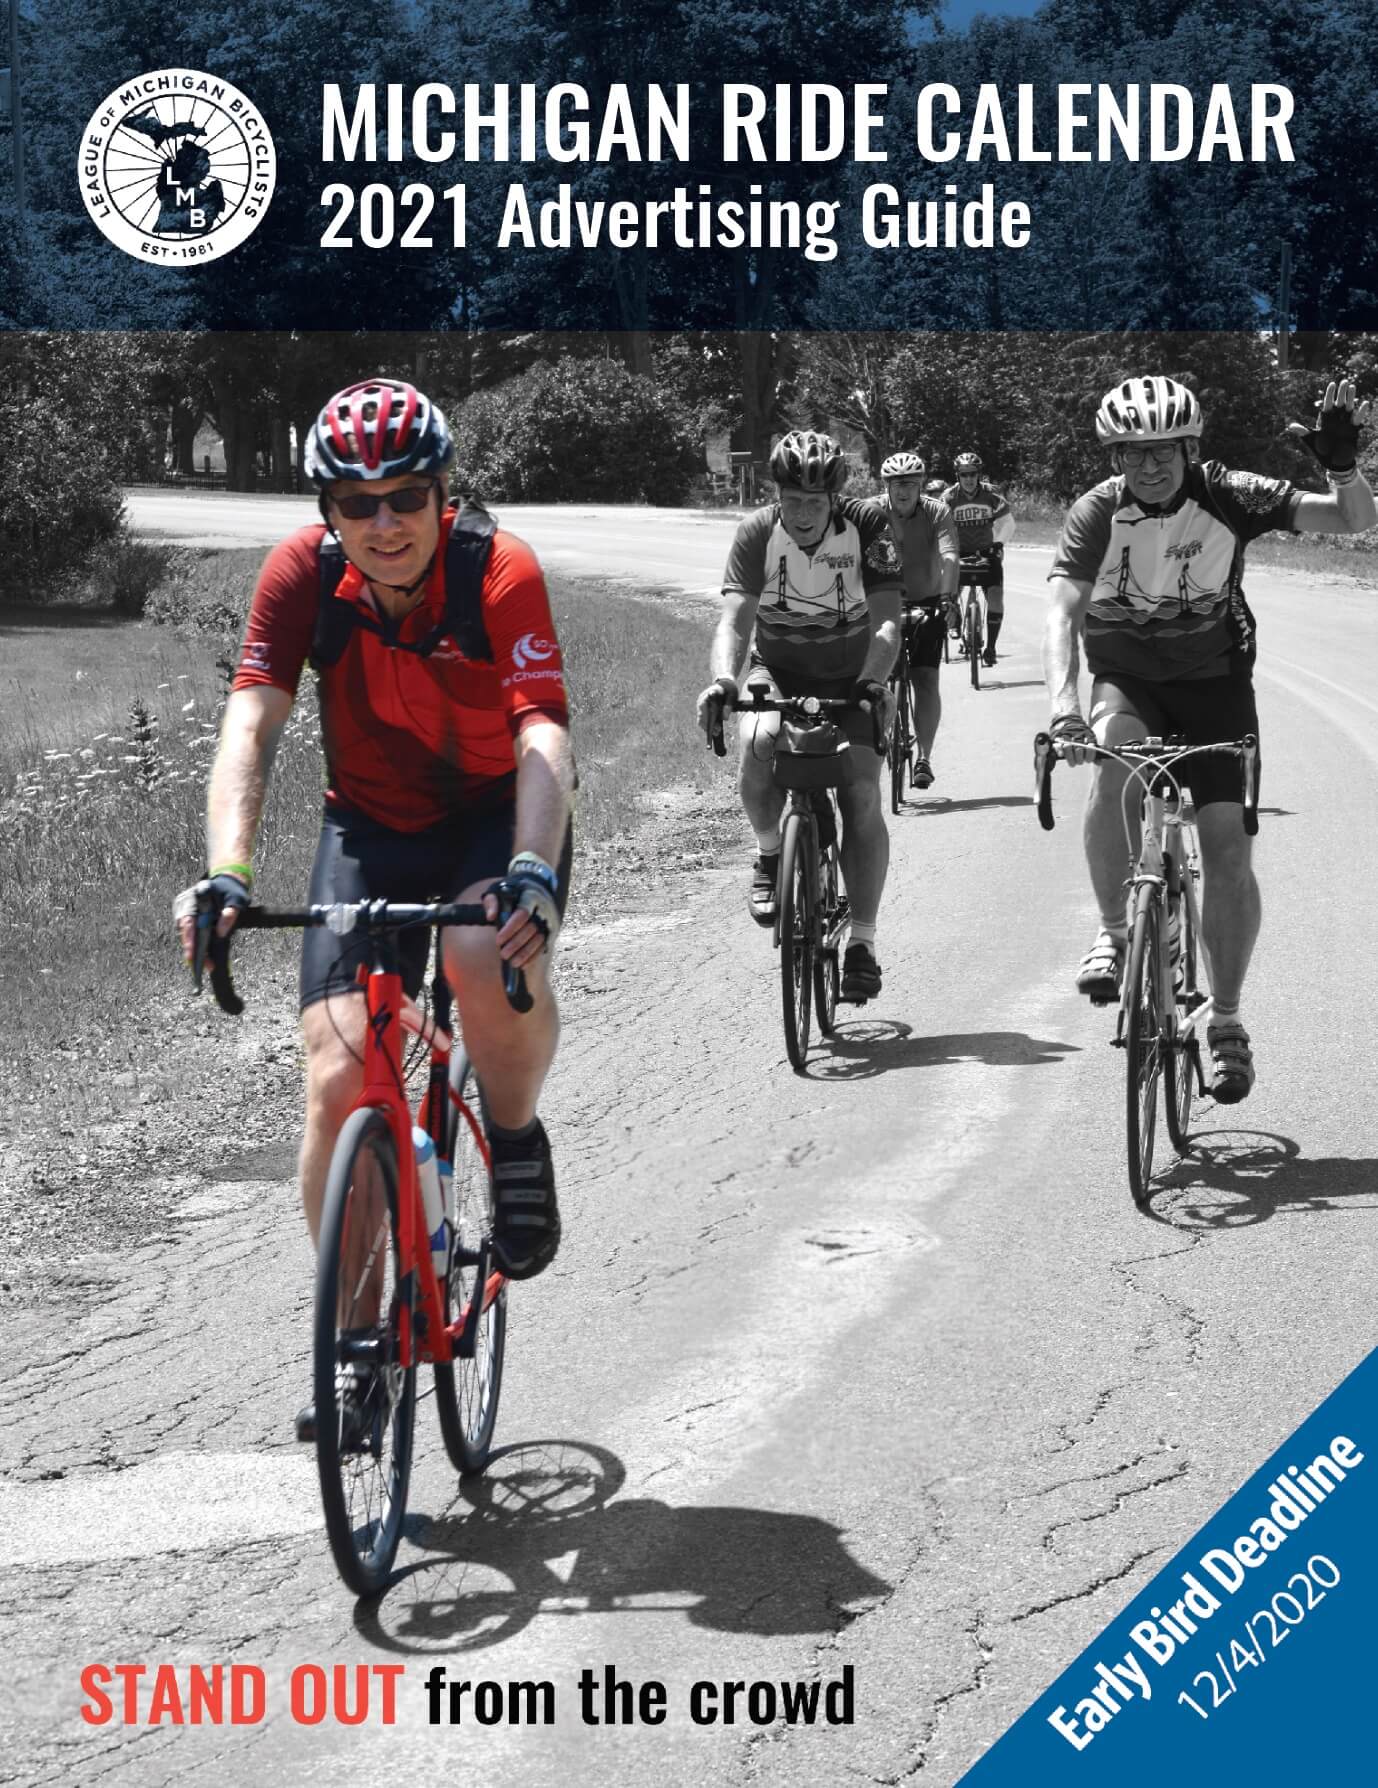 Advertising Guide Now Available for 2021 Ride Calendar League of